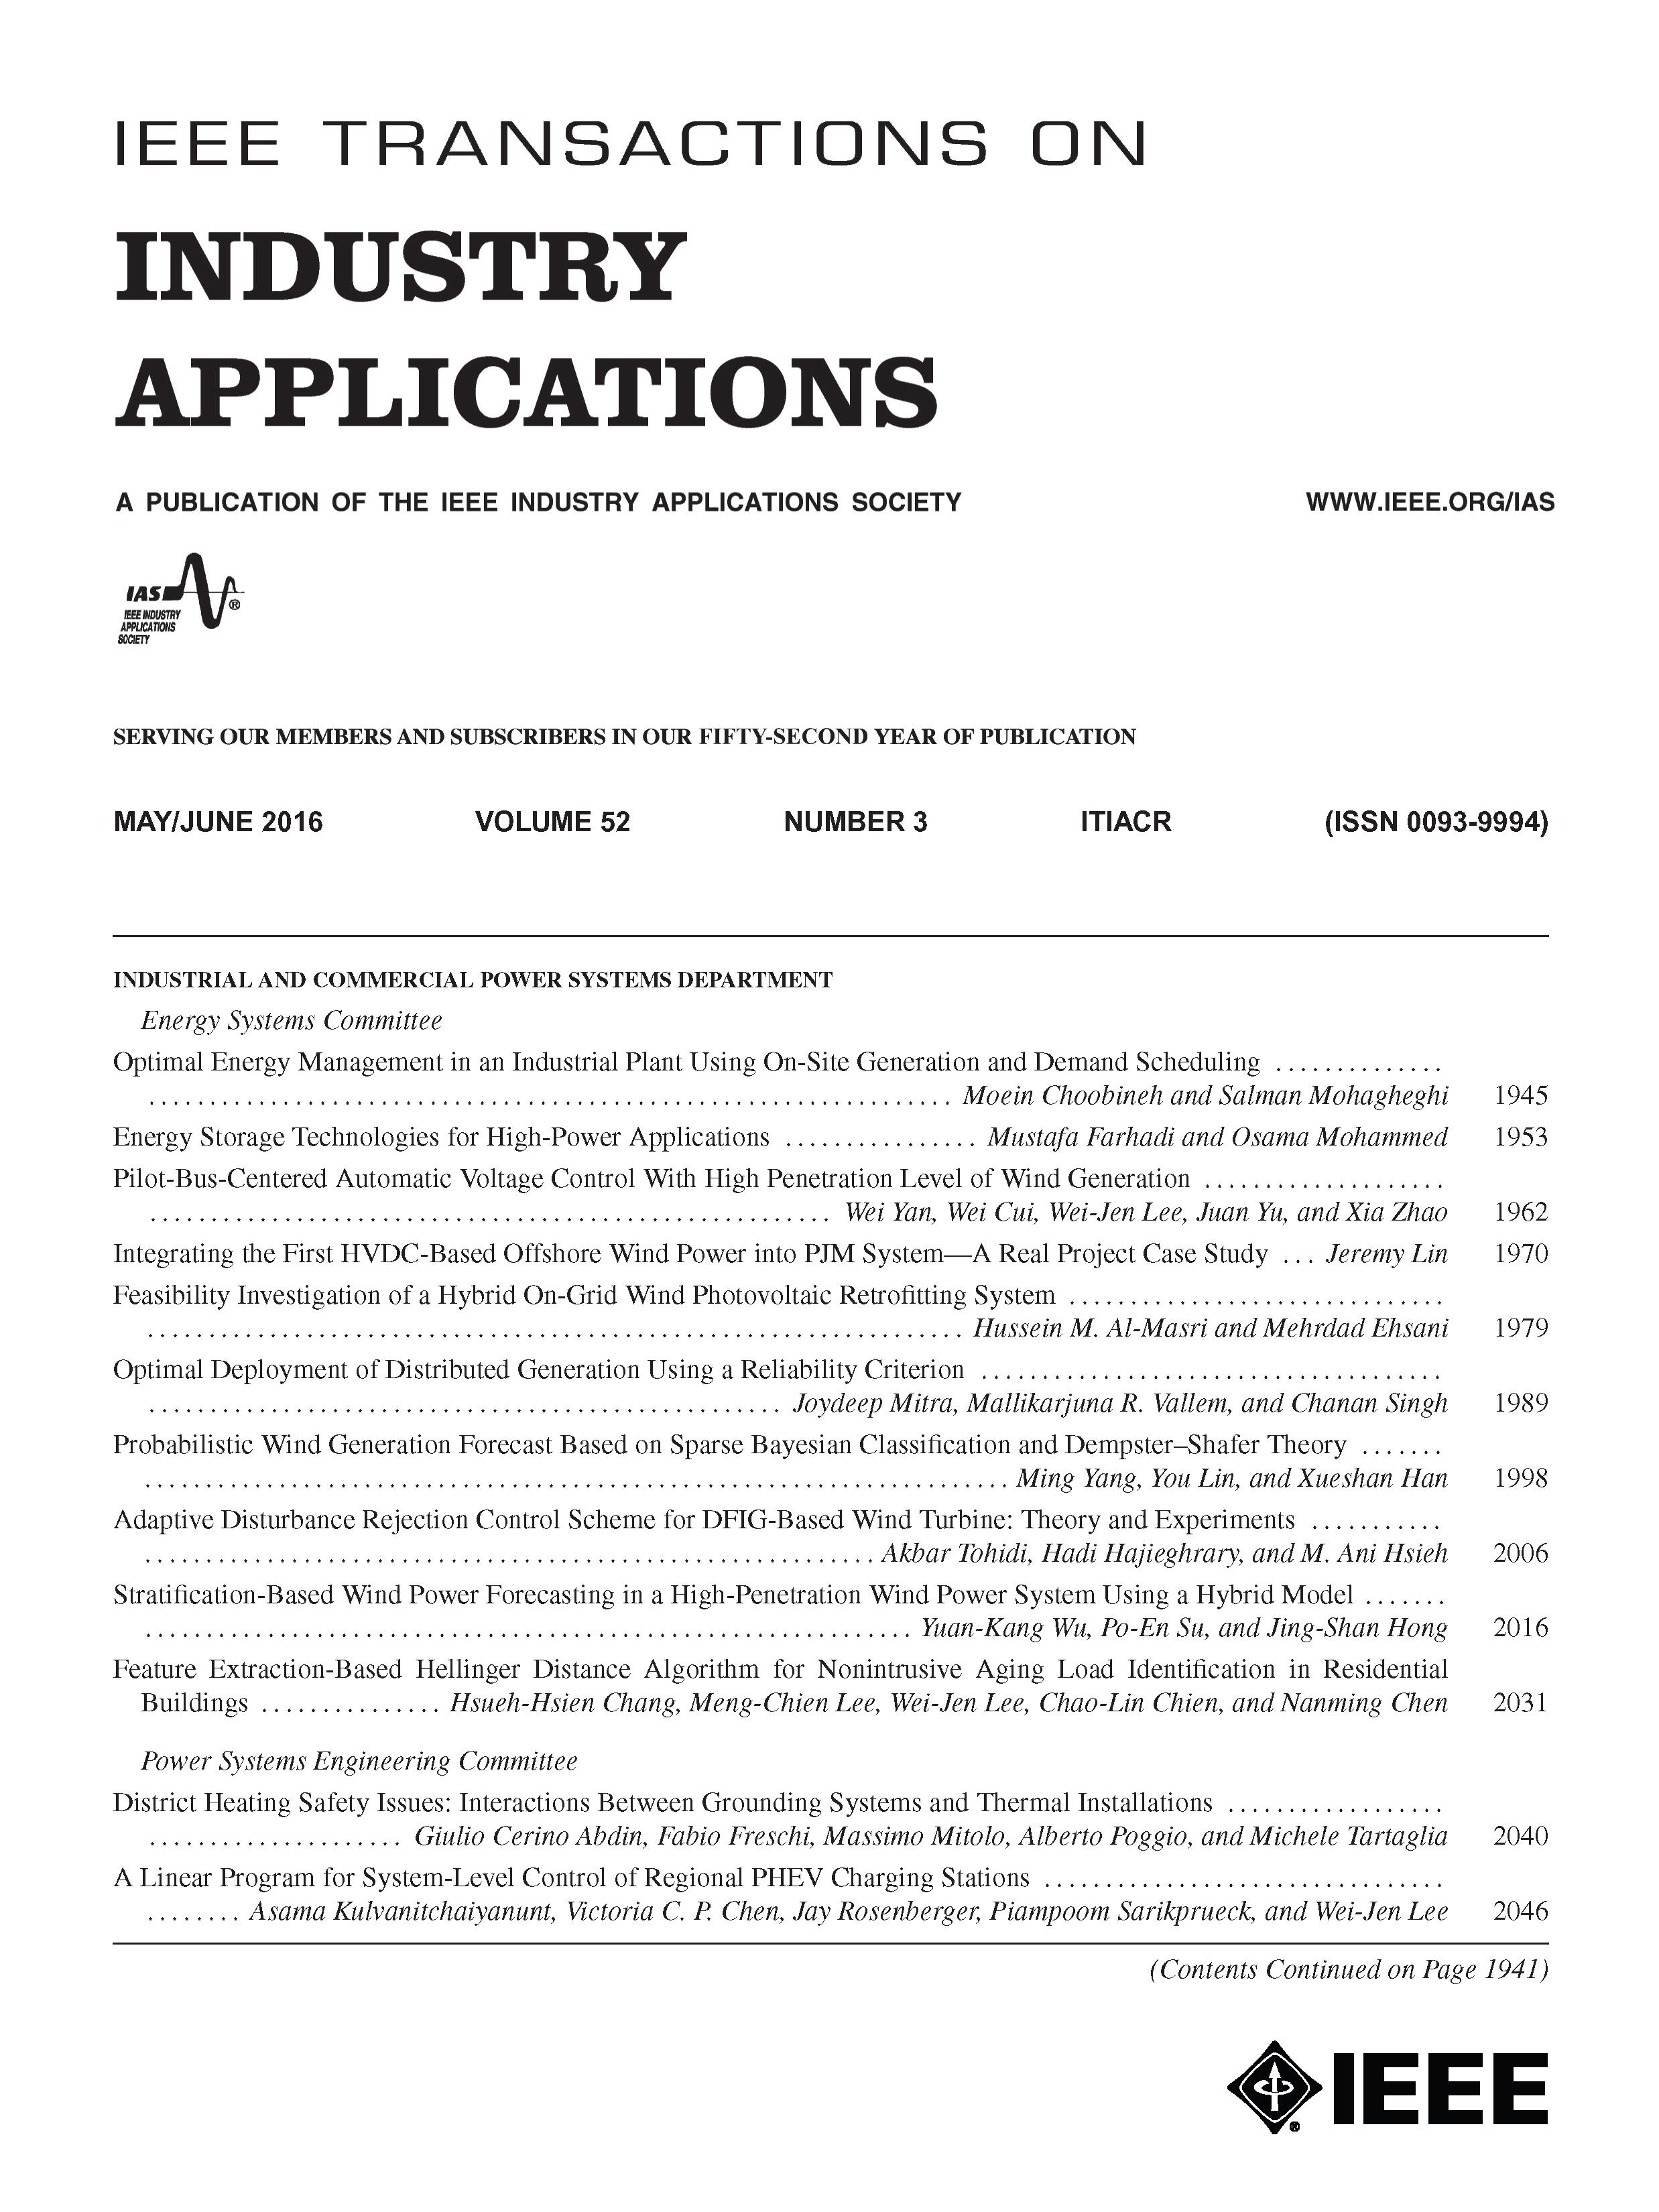 IEEE Transactions on Industry Applications 2016 V.52 N 3 Webкабинет